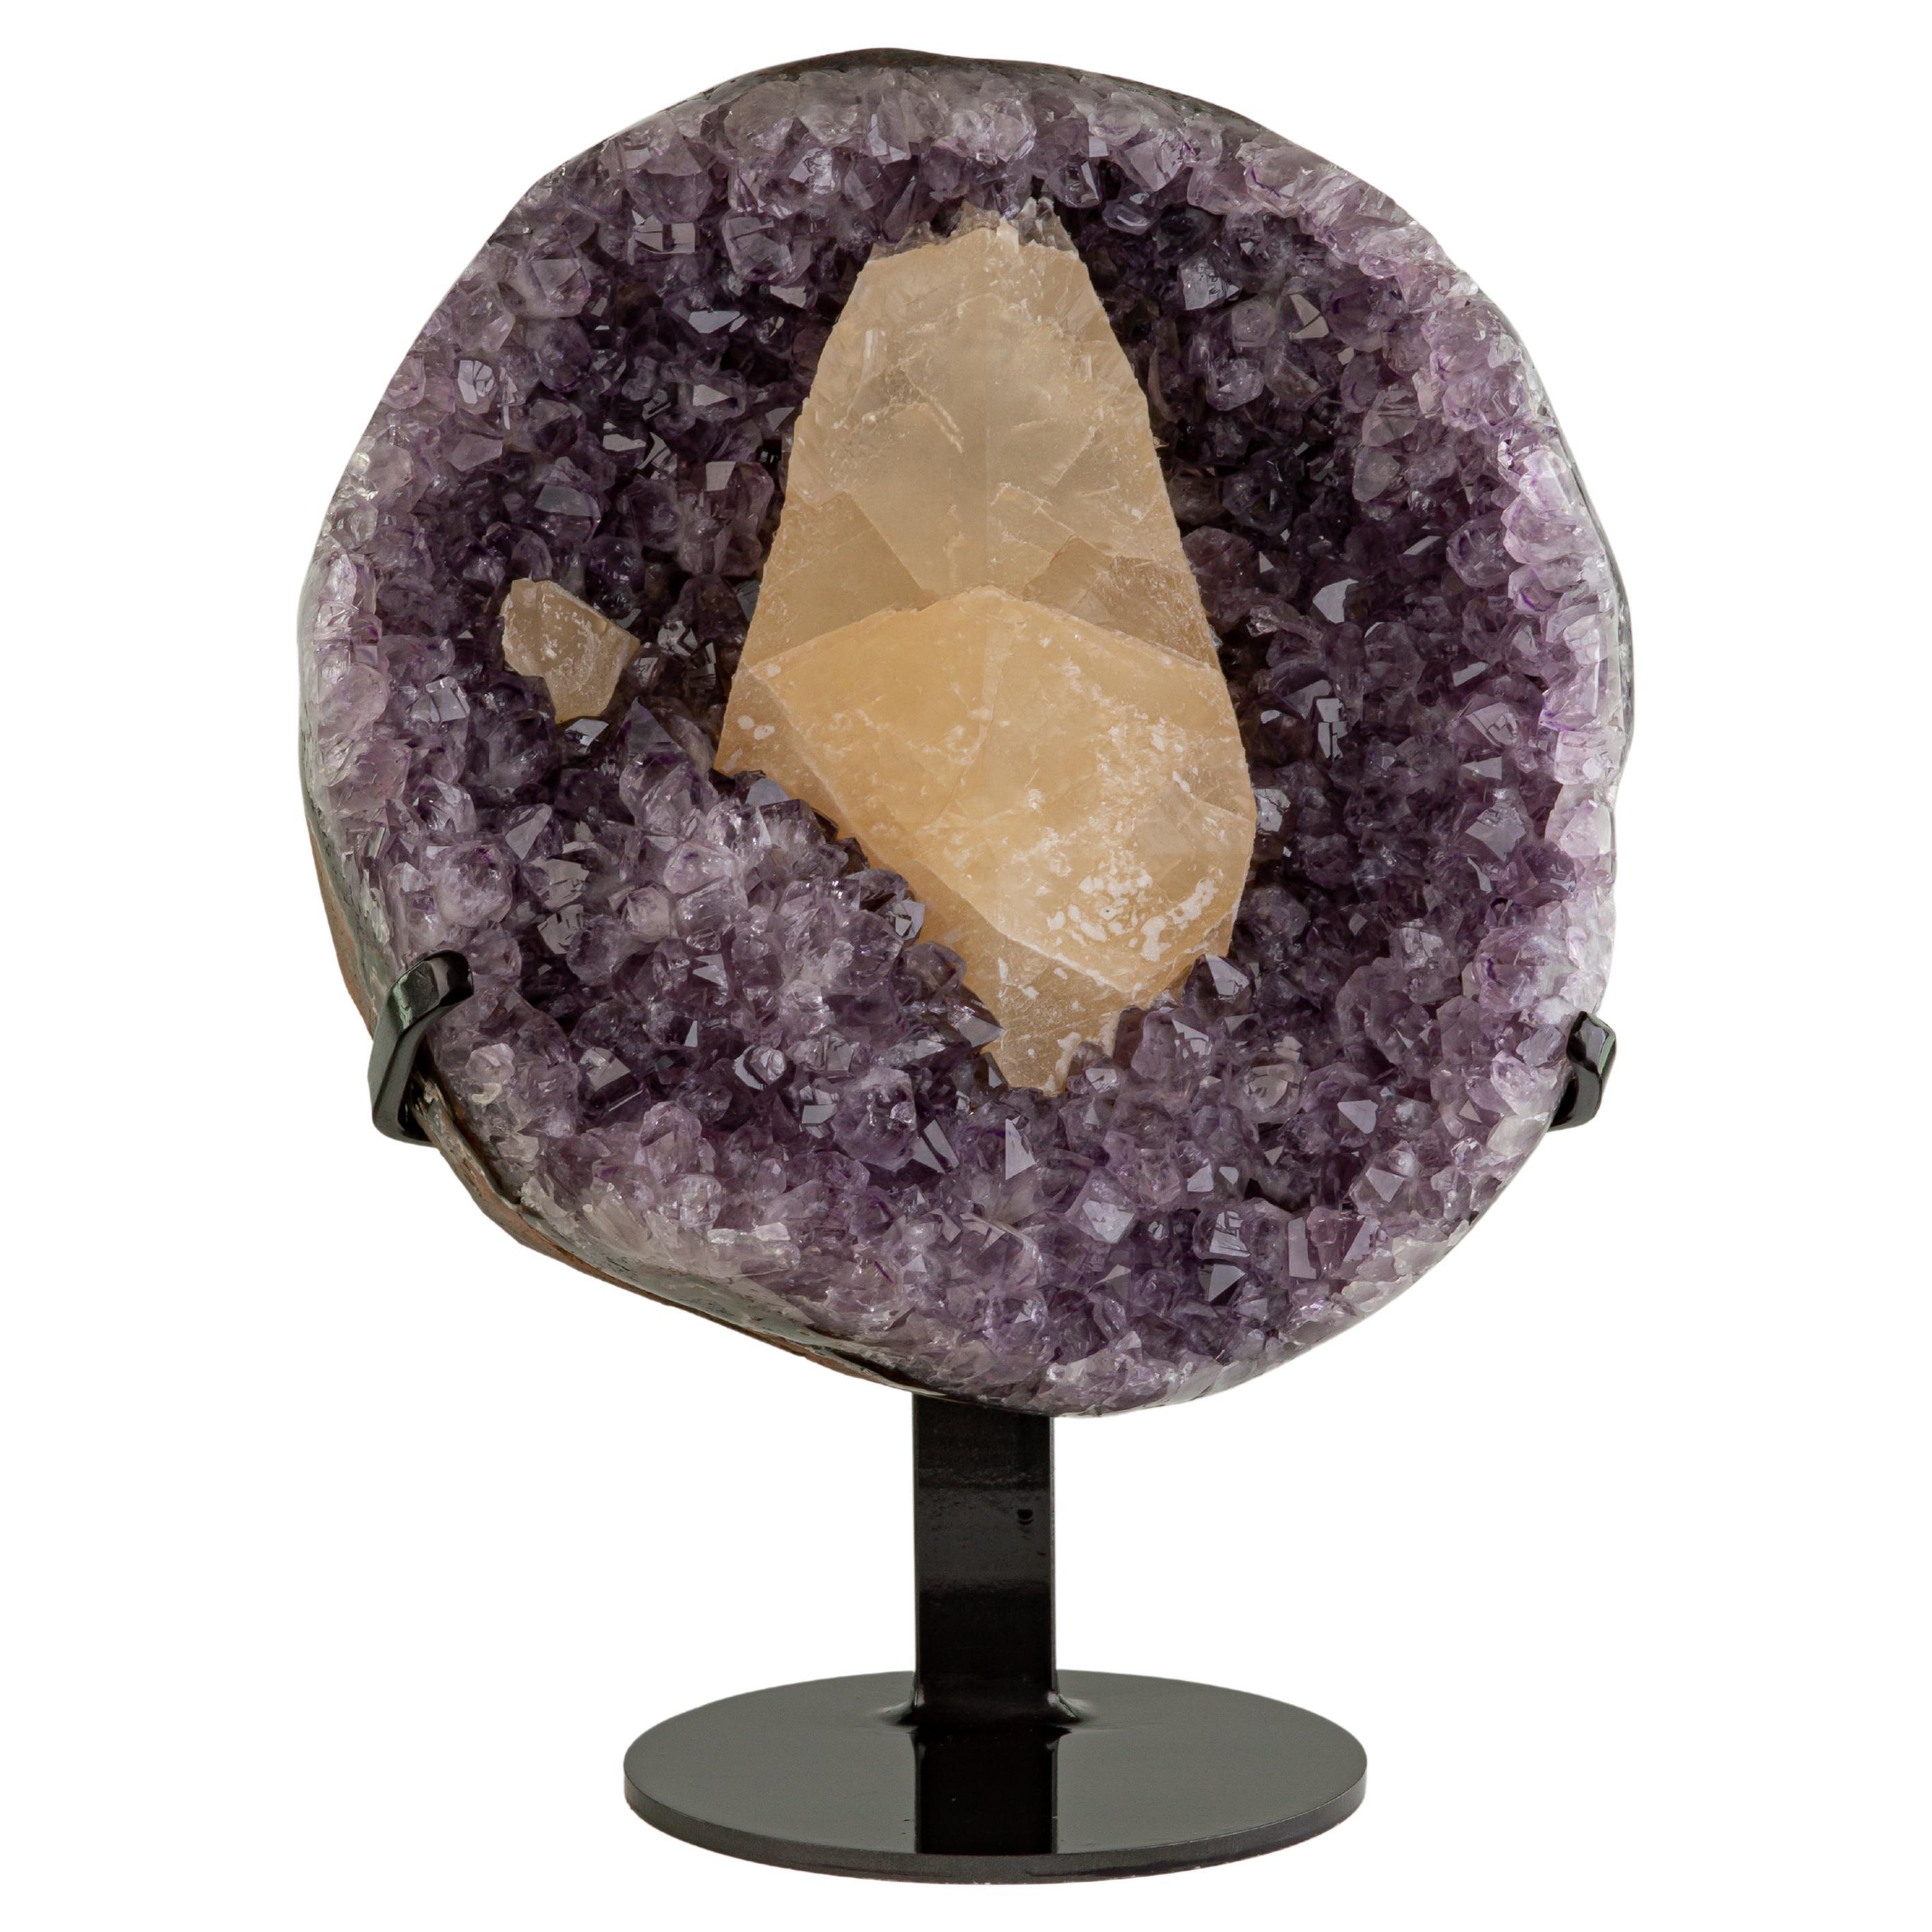 Lilac Half Geode with a Calcite Formation